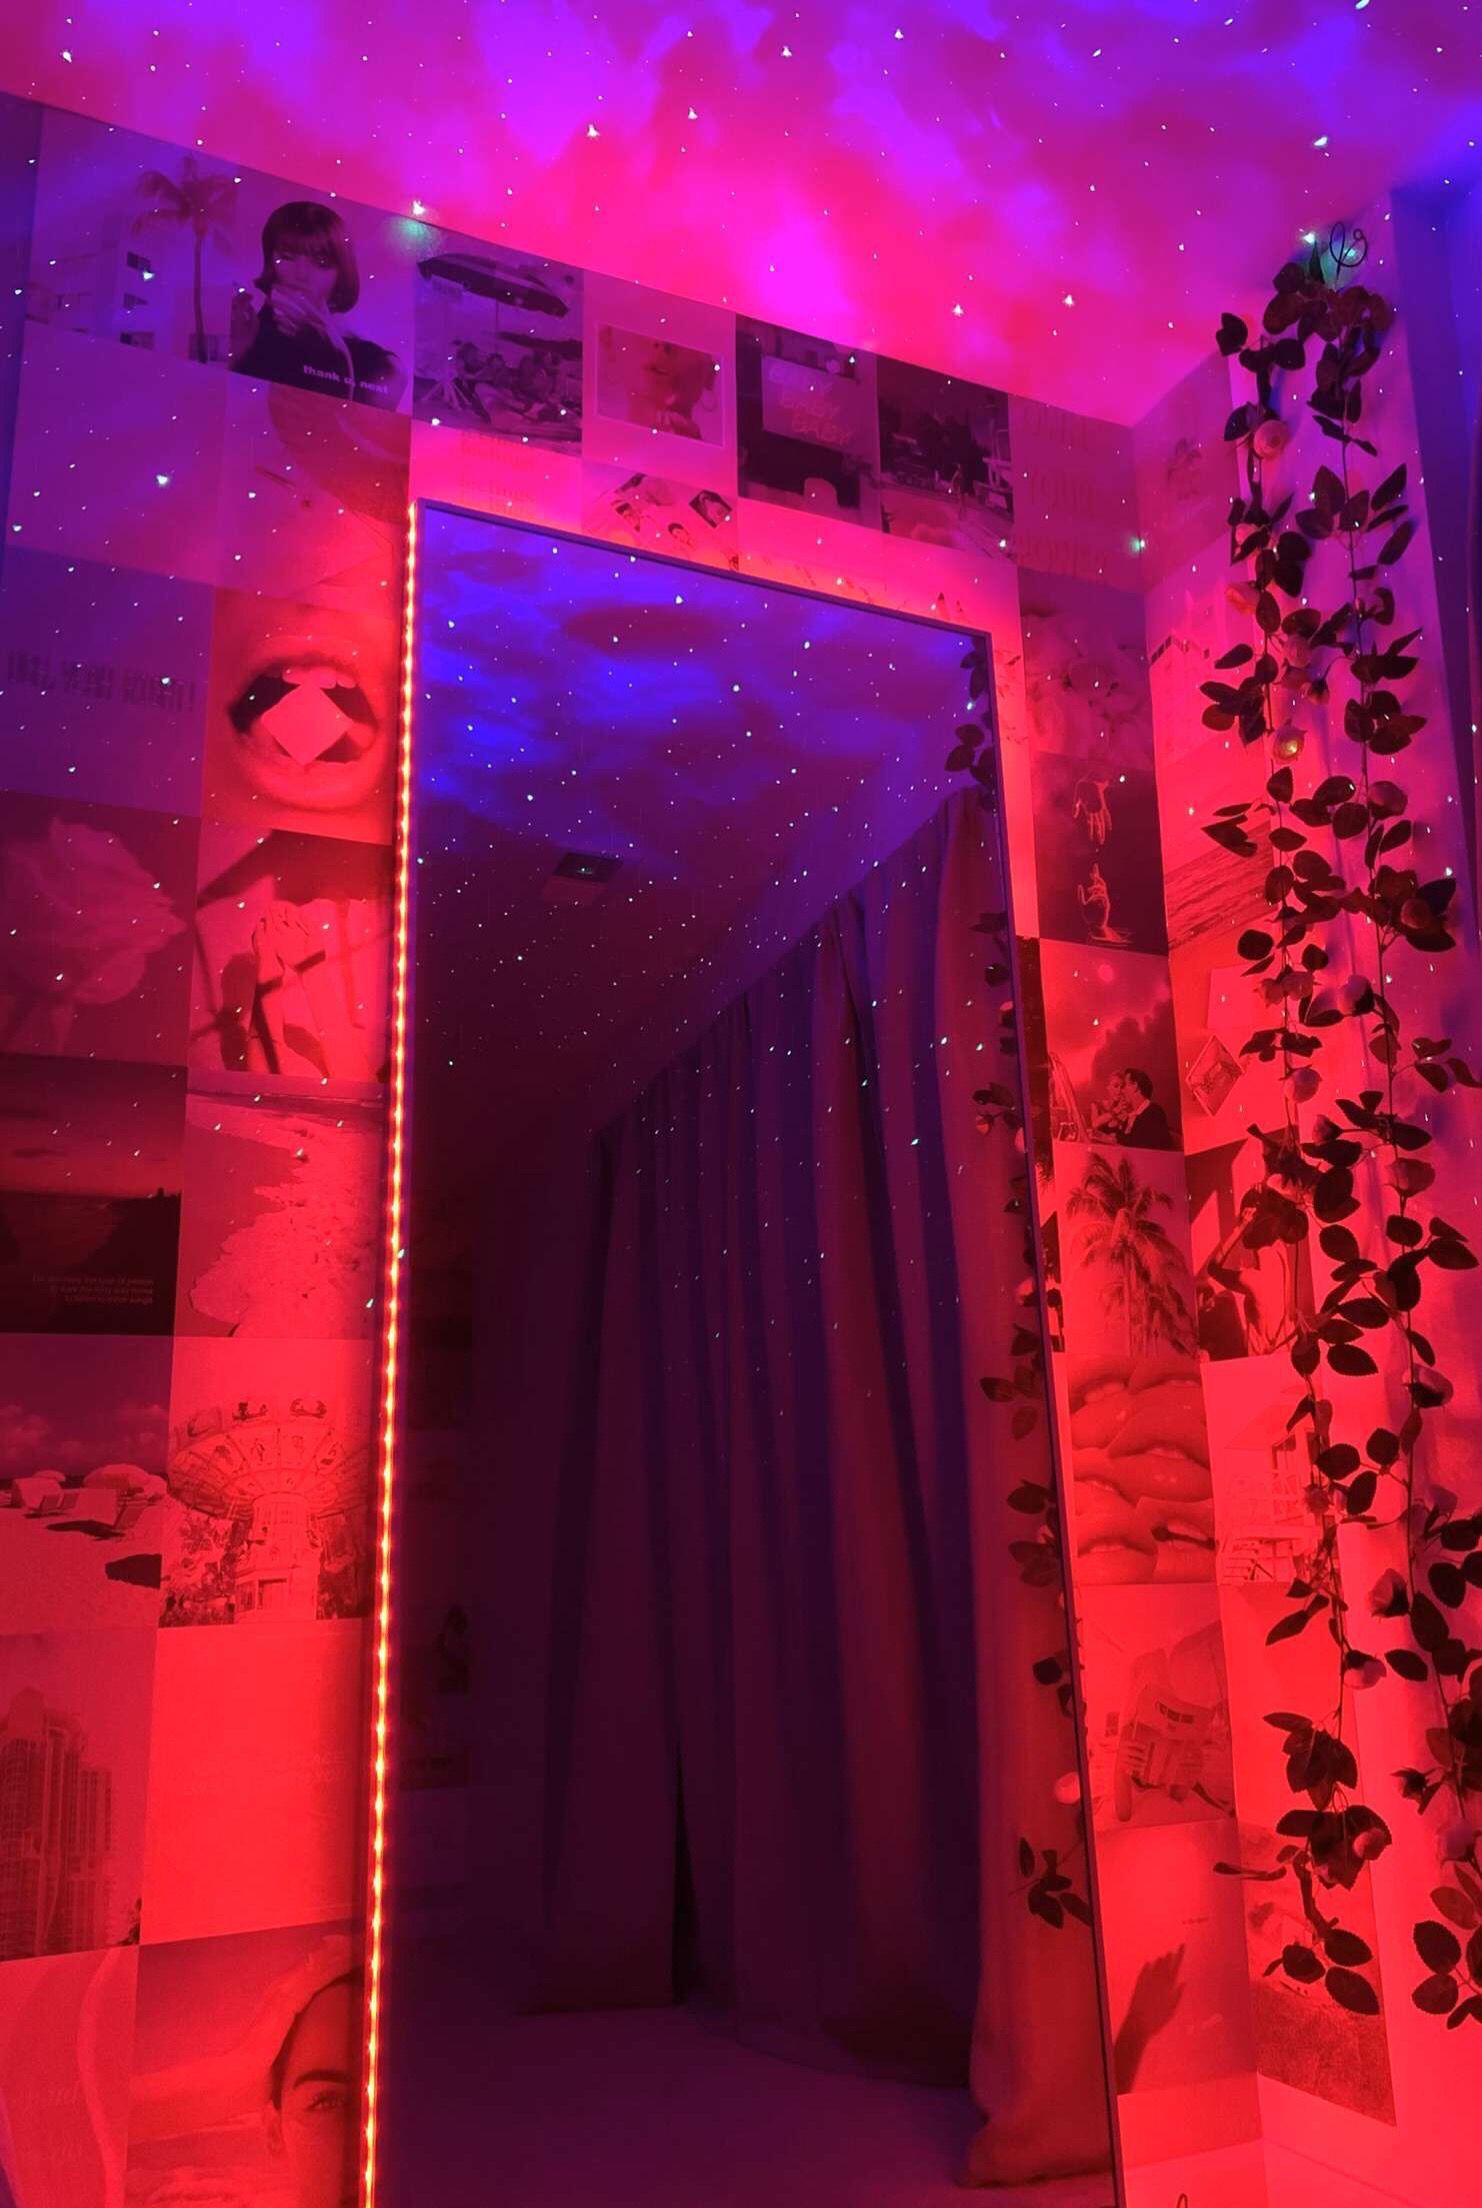 Use code “Ismelda” for $$ off Love my lights and galaxy projector from @thelitlight - Use code “Ismelda” for $$ off Love my lights and galaxy projector from @thelitlight -   15 room decor aesthetic indie ideas